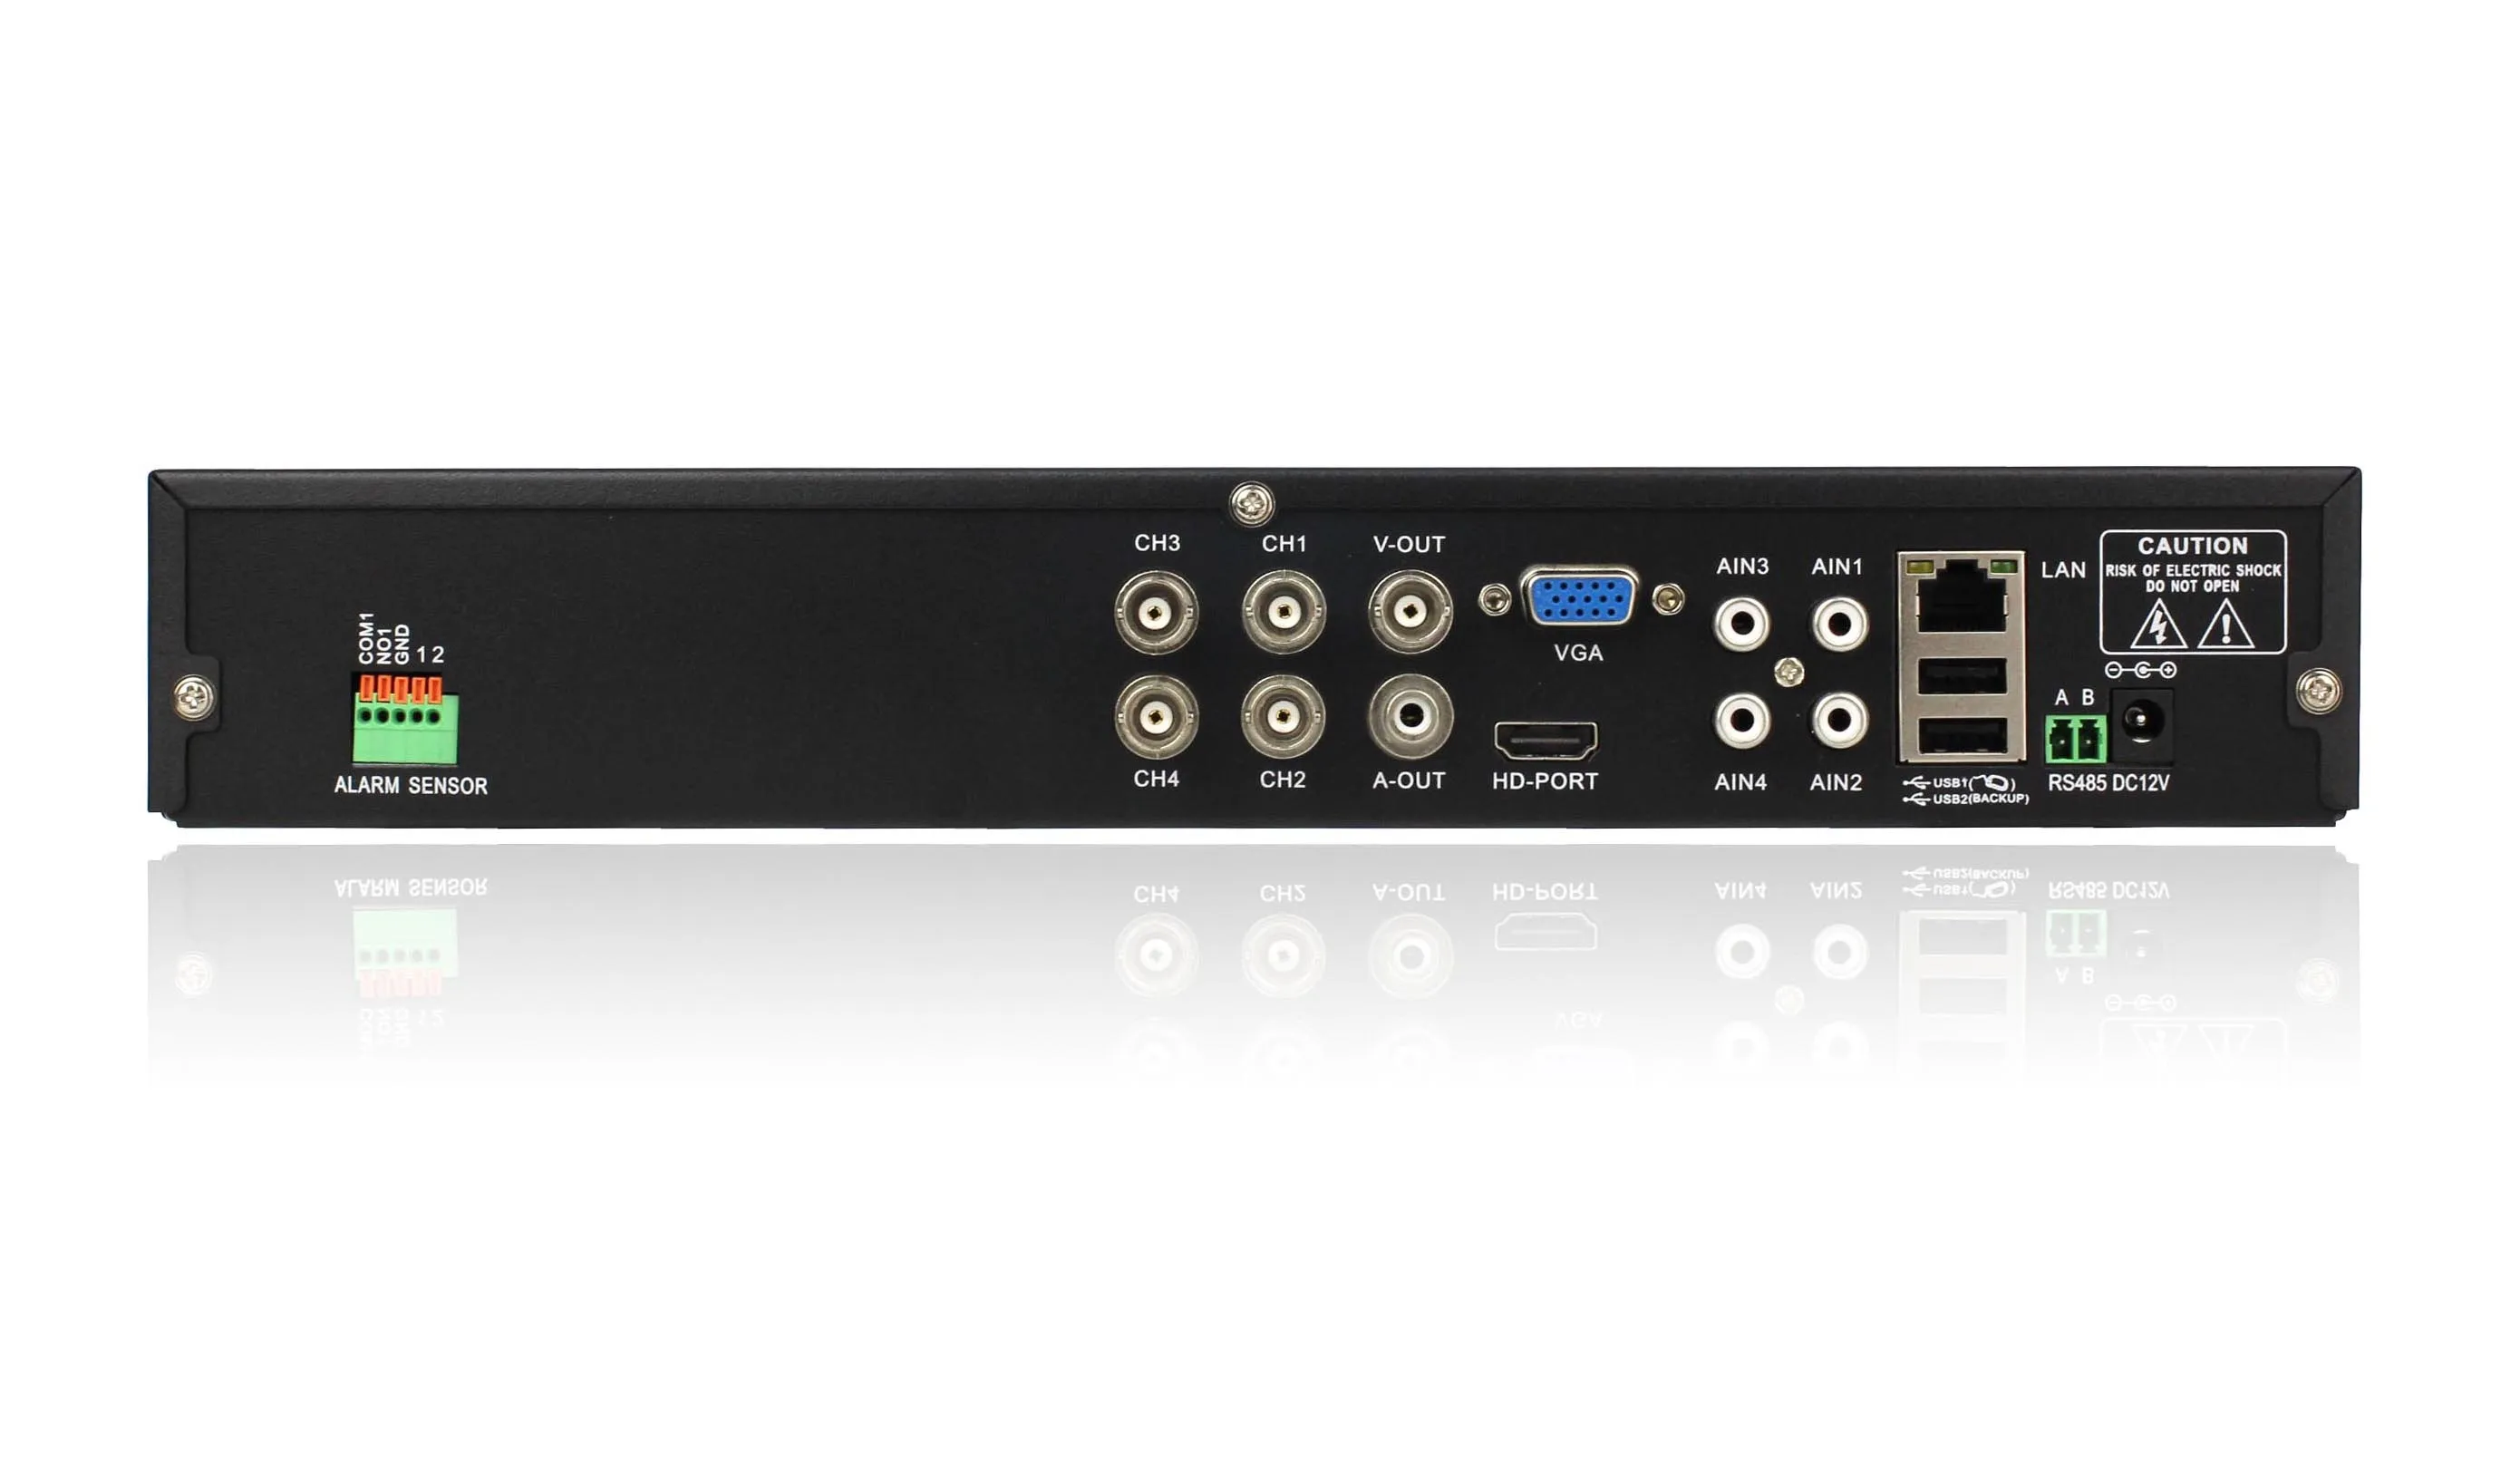 usb 4 channel dvr did not record the audio